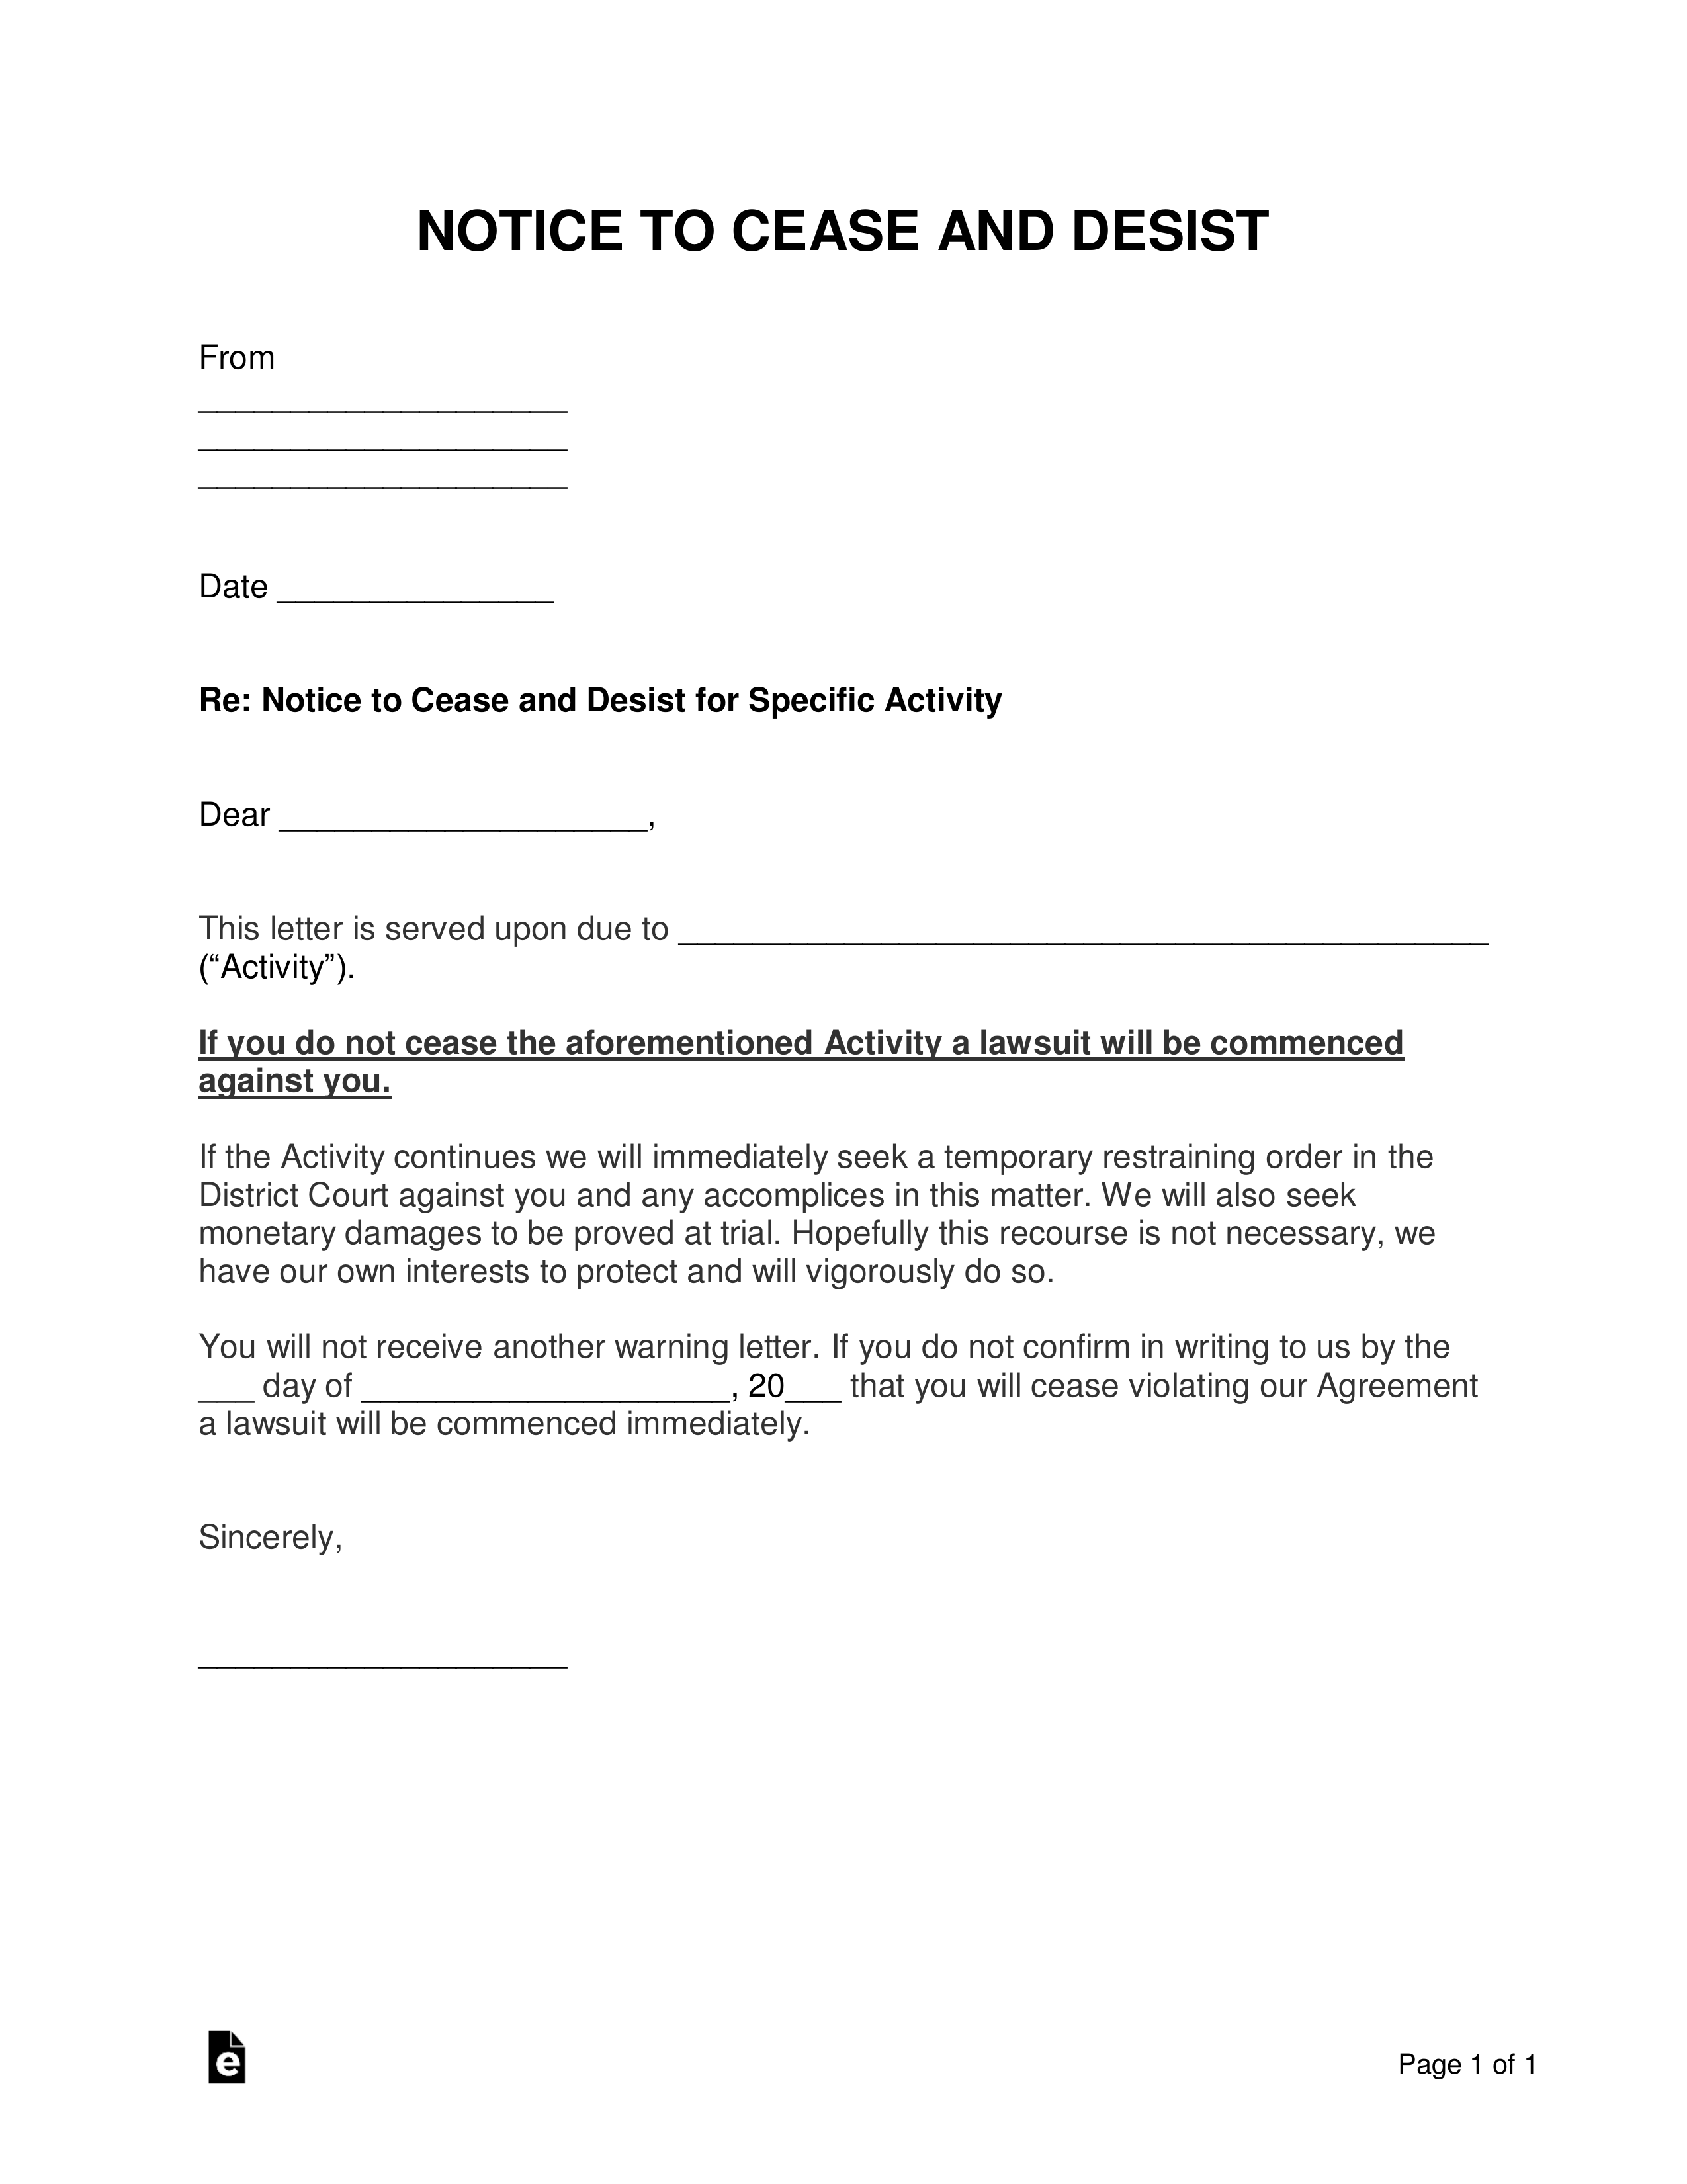 Free Cease And Desist Letter Templates 9 PDF Word EForms